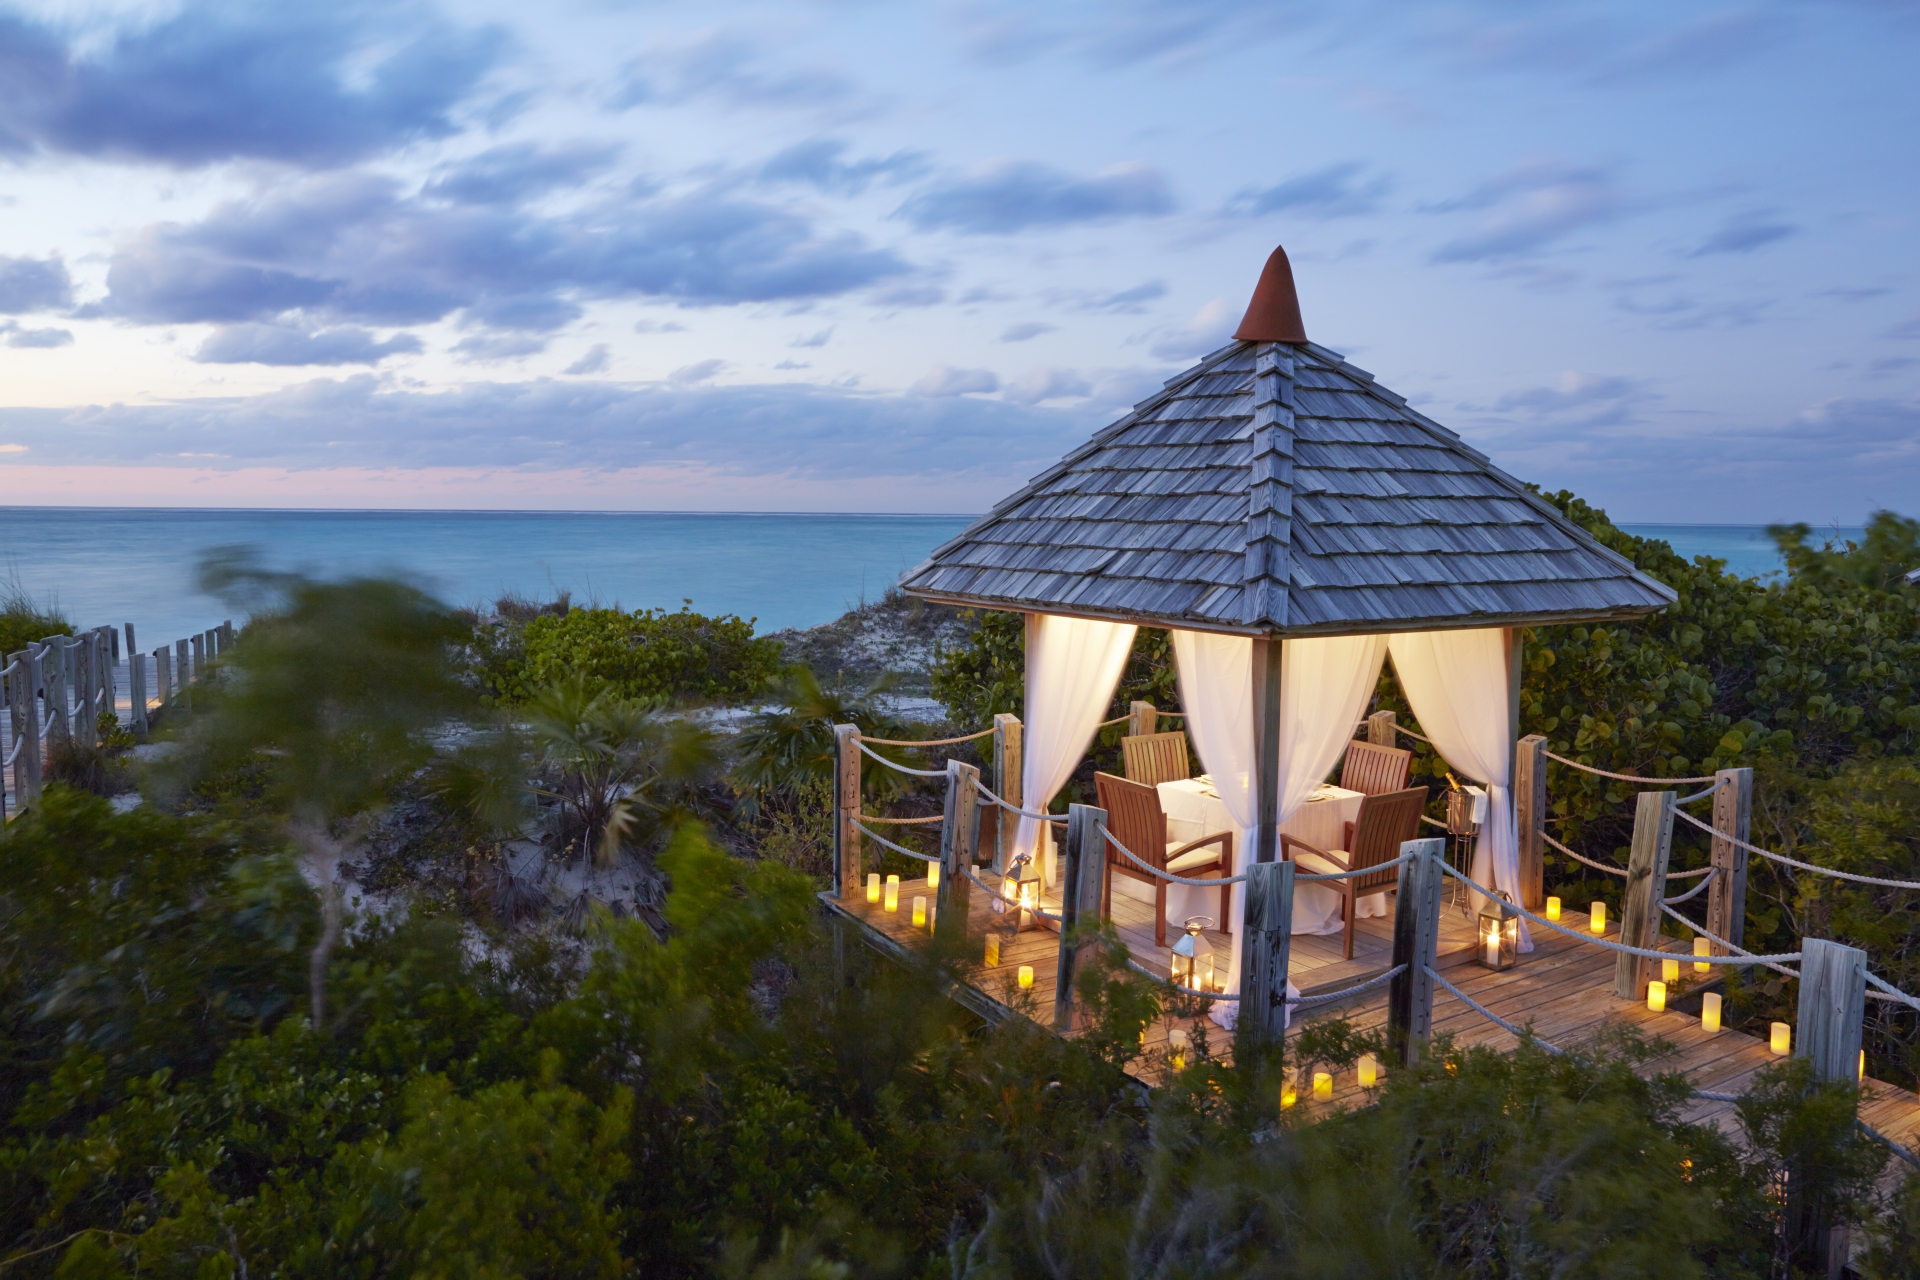 Sunset dinner at Parrot Cay - 